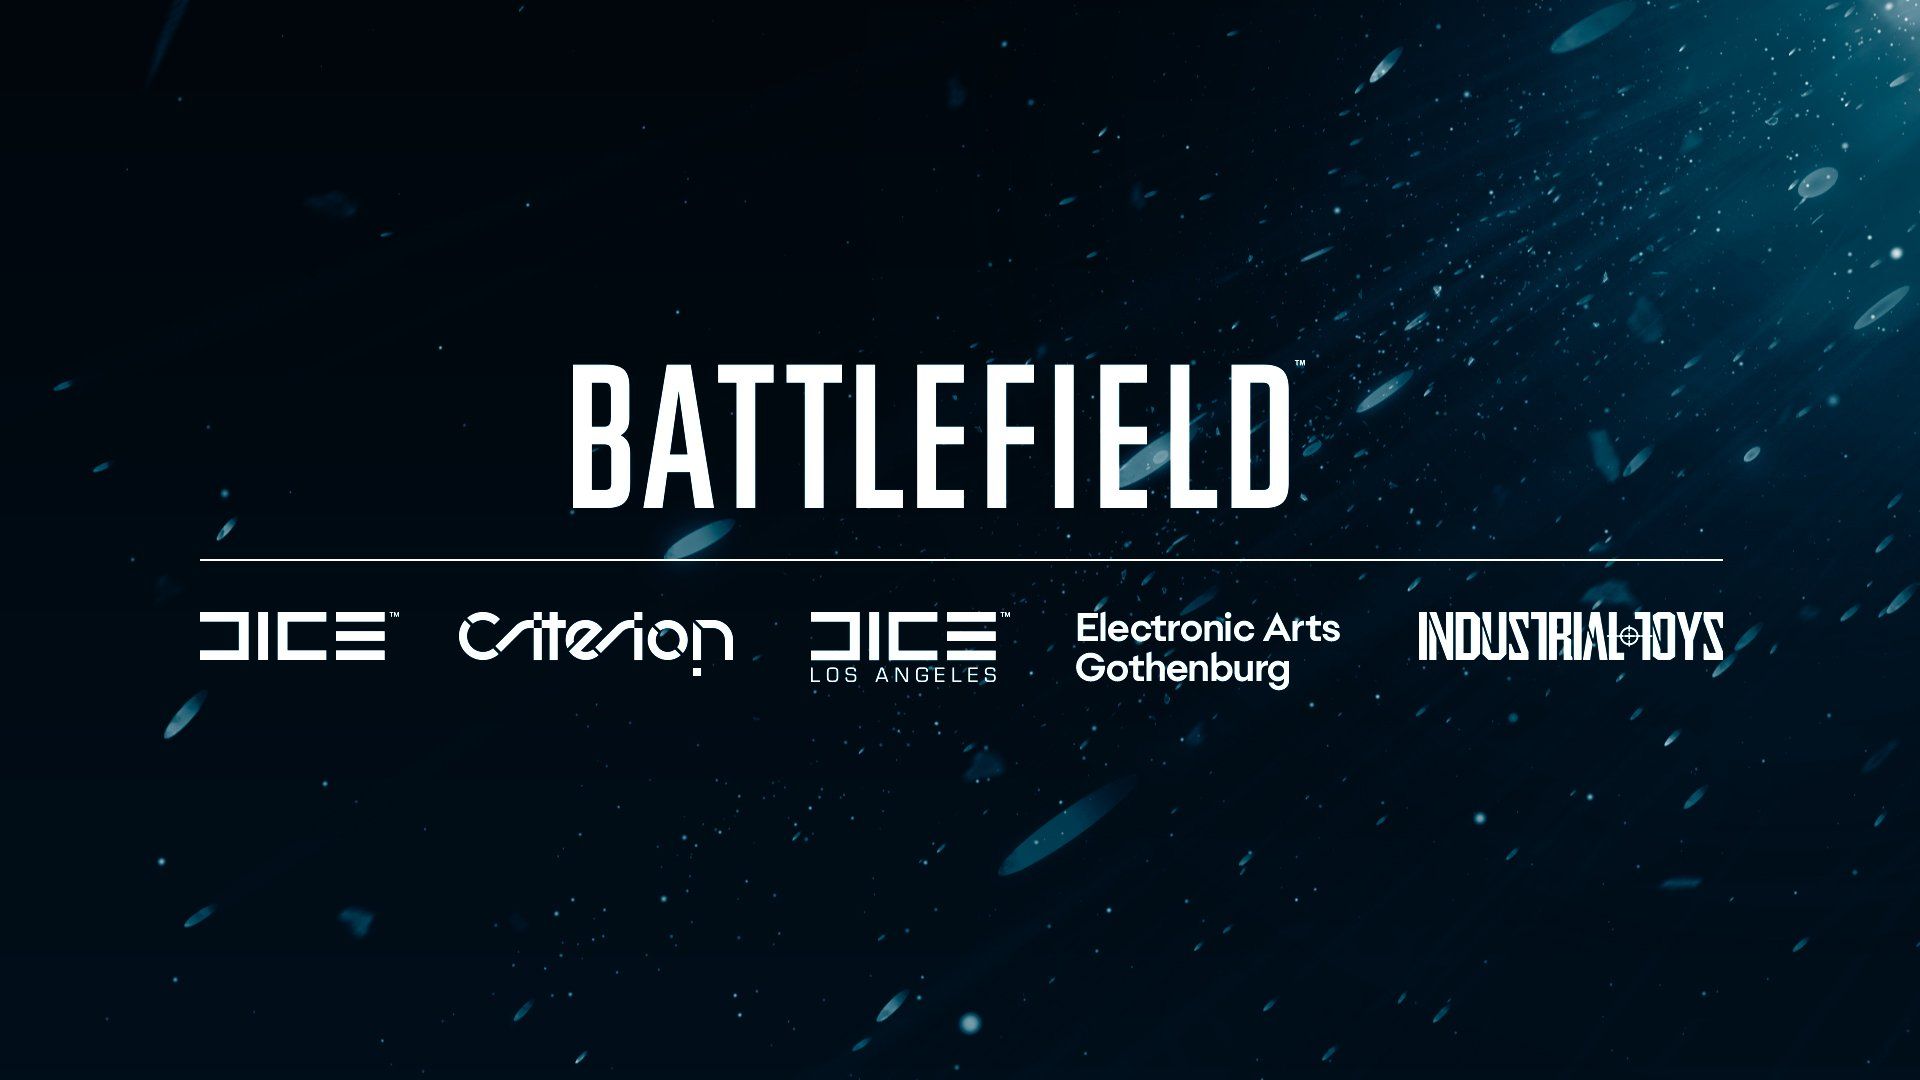 Battlefield 6's reveal is now seemingly scheduled for June